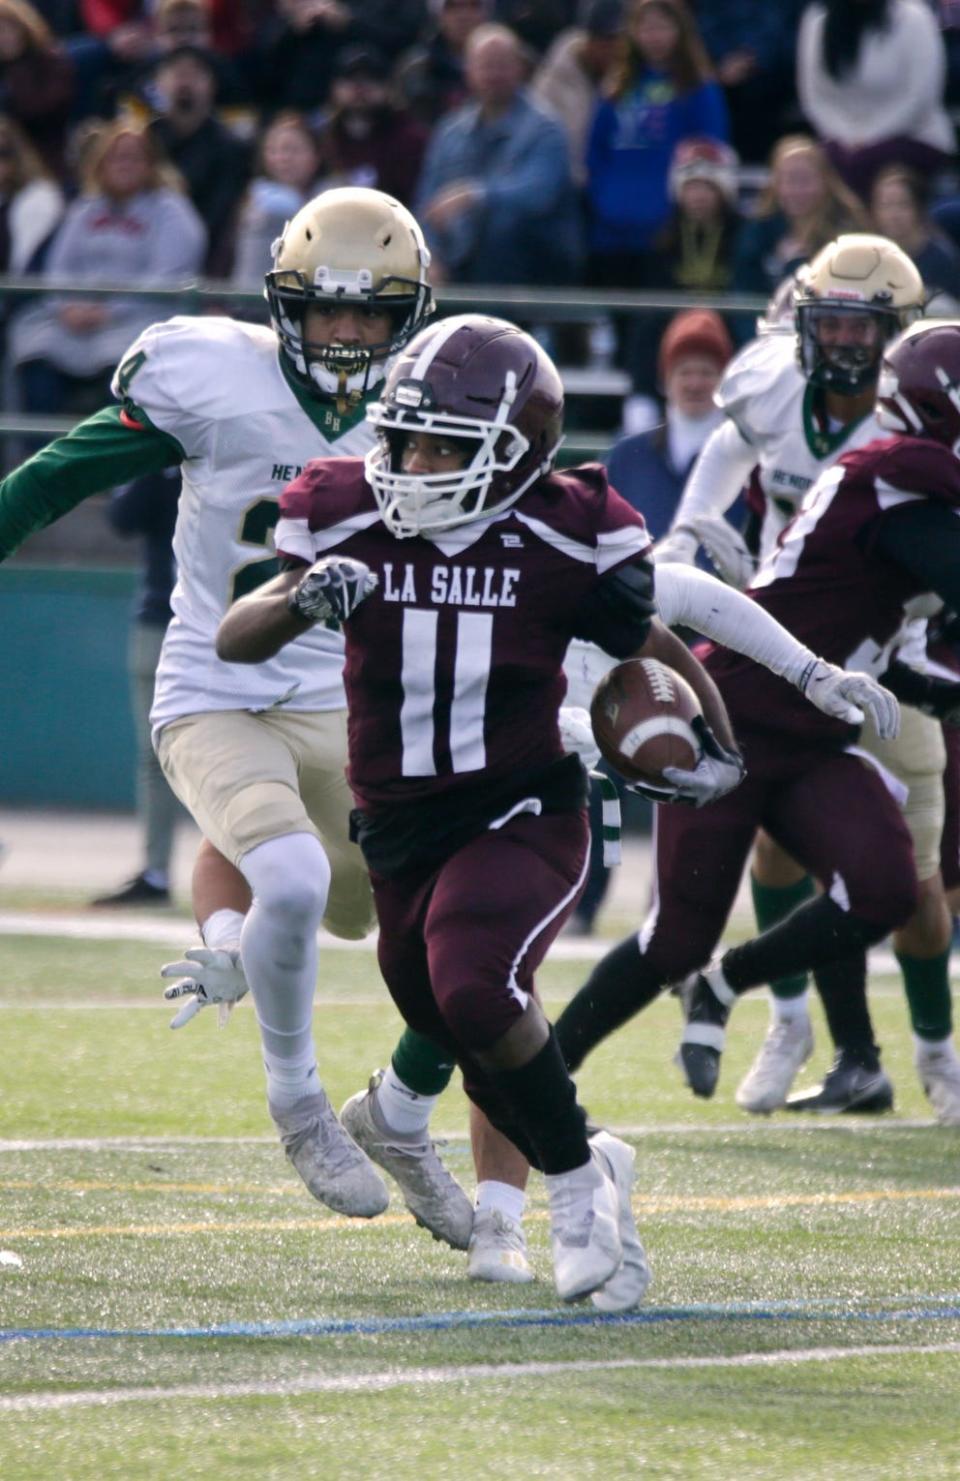 Jacob Gibbons and the La Salle football team host Thanksgiving Day rival East Providence Thursday at 10 a.m.